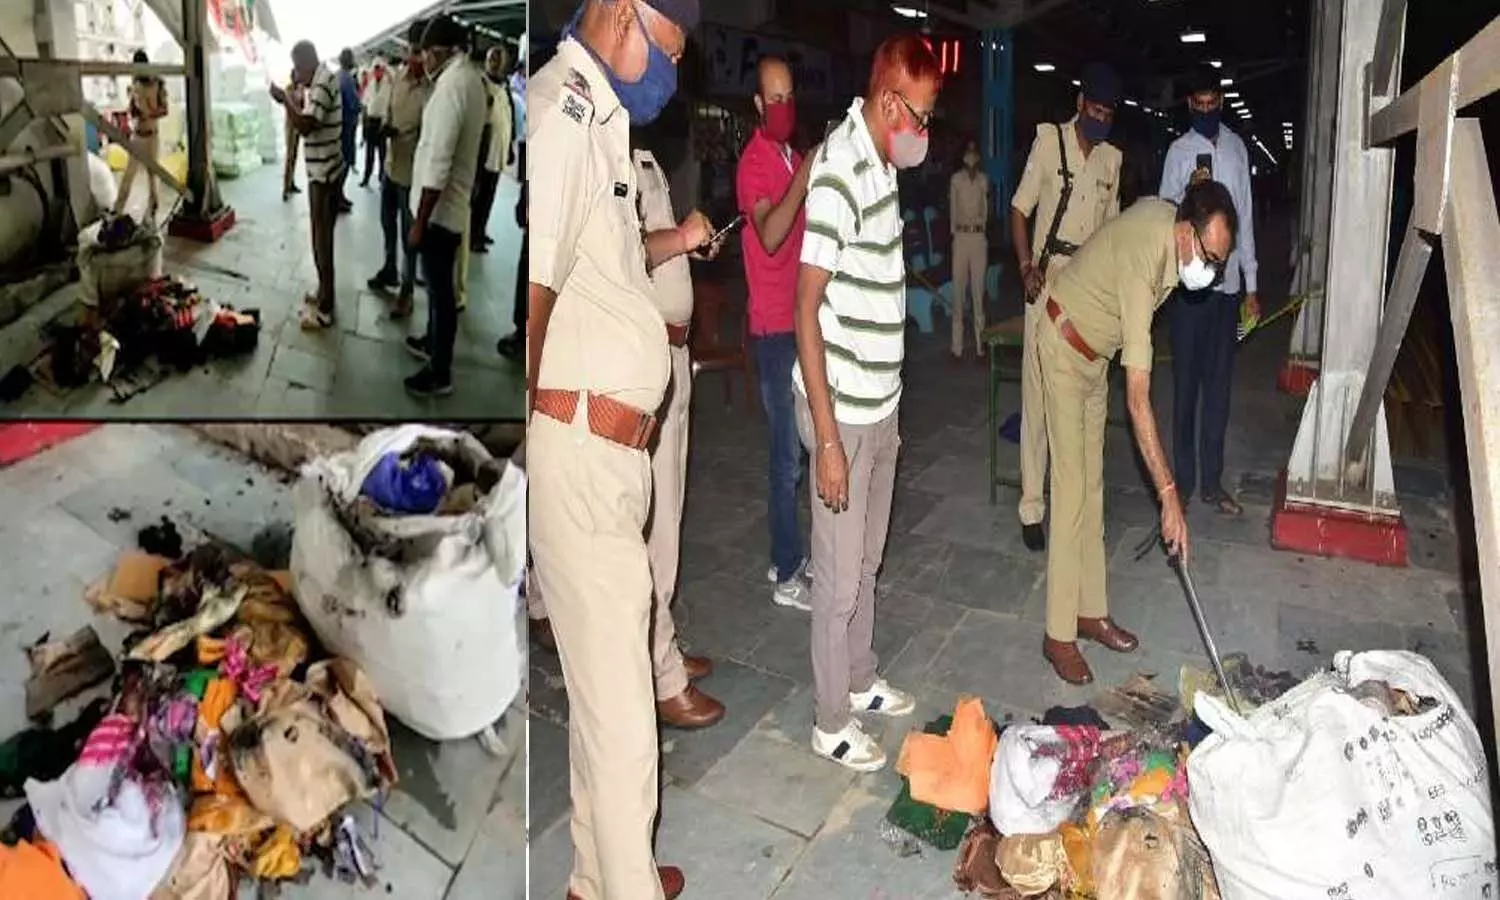 Blast In Clothes Bundle on Darbhanga Railway Station in cloth packet in  which the explosion took place had reached Darbhanga by Secunderabad- Darbhanga Special Express Train. | दरभंगा स्टेशन पर ब्लास्ट: सिकंदराबाद से